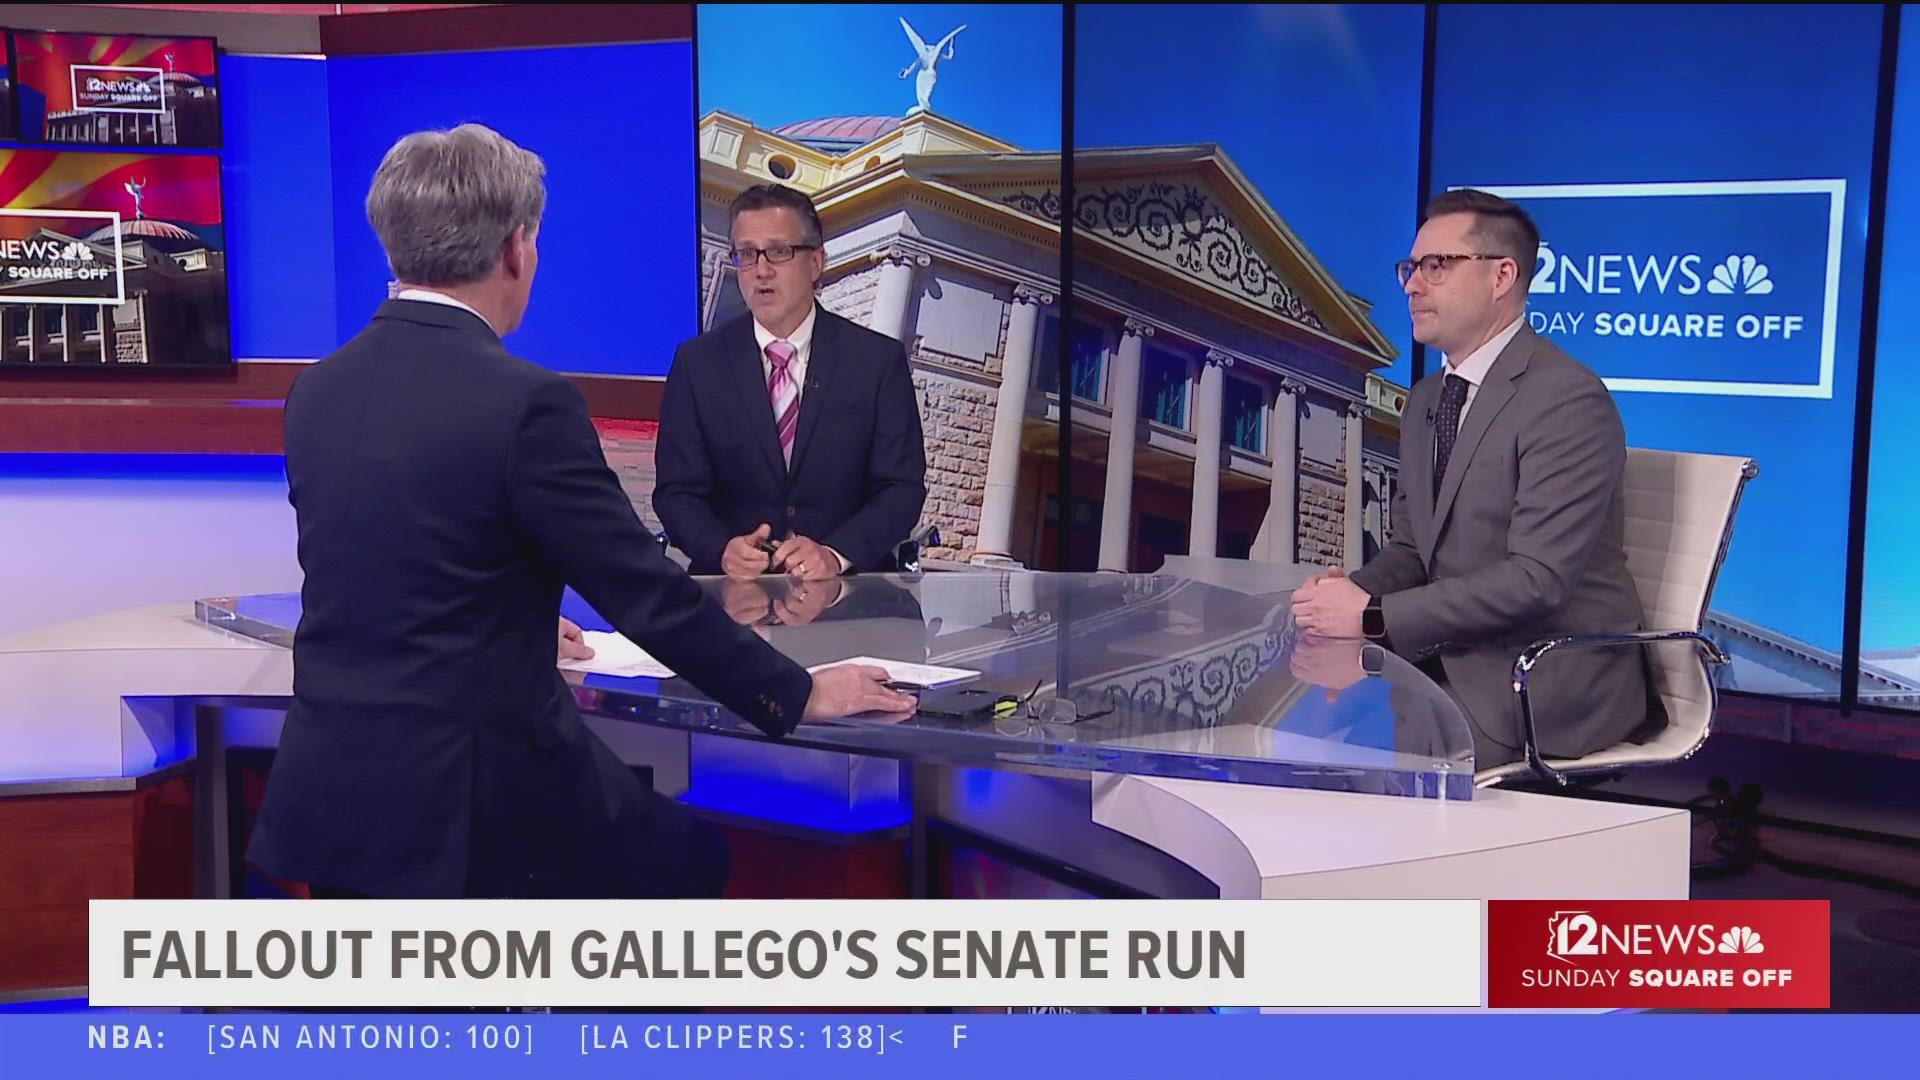 How long can the president, the Senate majority leader and other Washington Democrats wait to back a candidate in the Arizona U.S. Senate race?